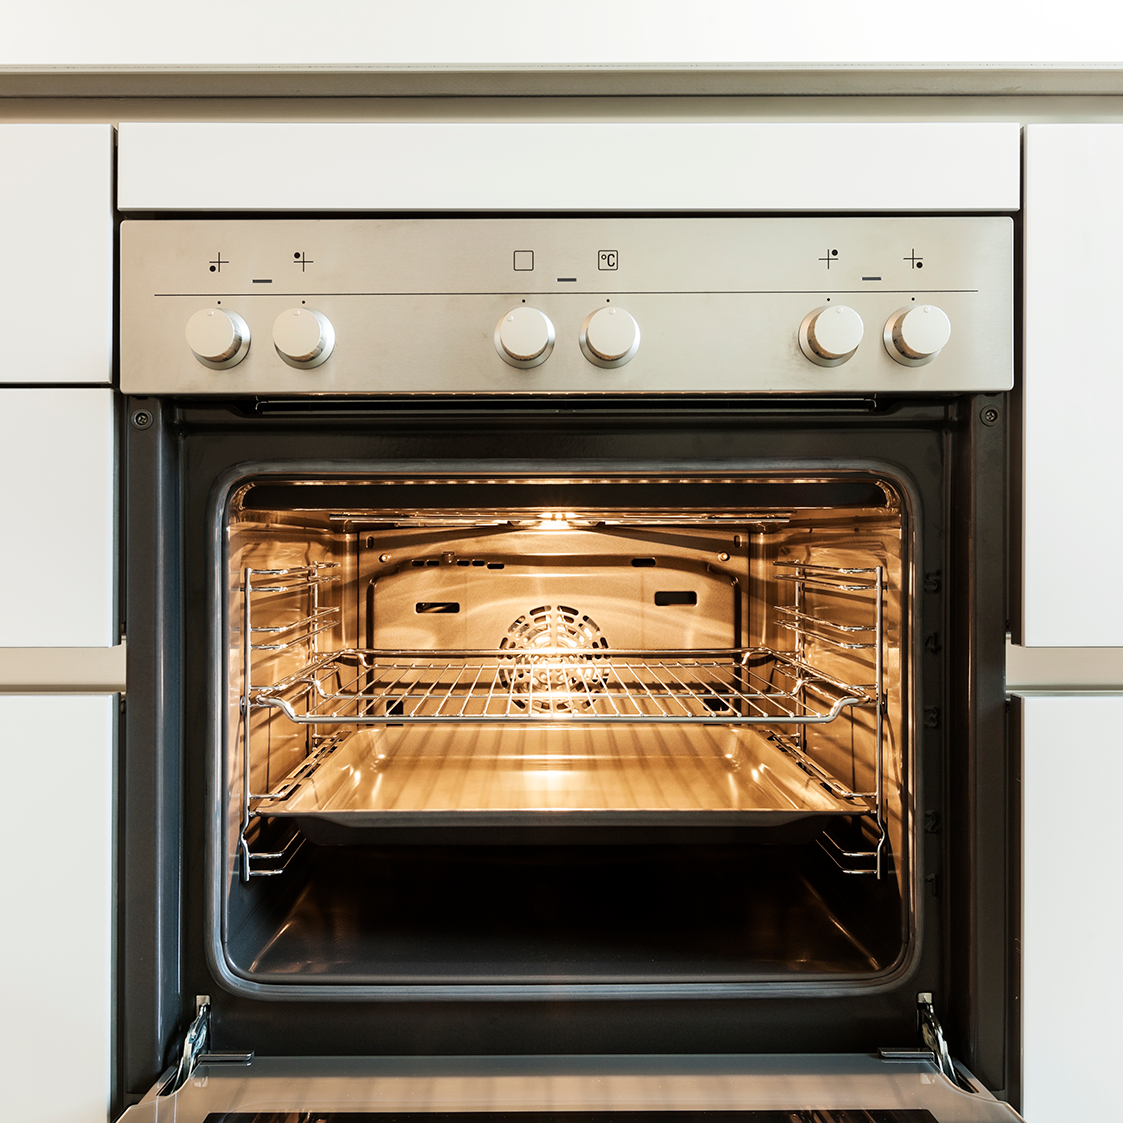 How To Turn Off Self cleaning Oven How Self-Cleaning Ovens Work: When and How to Use Your Oven's Self-Cleaning  Function